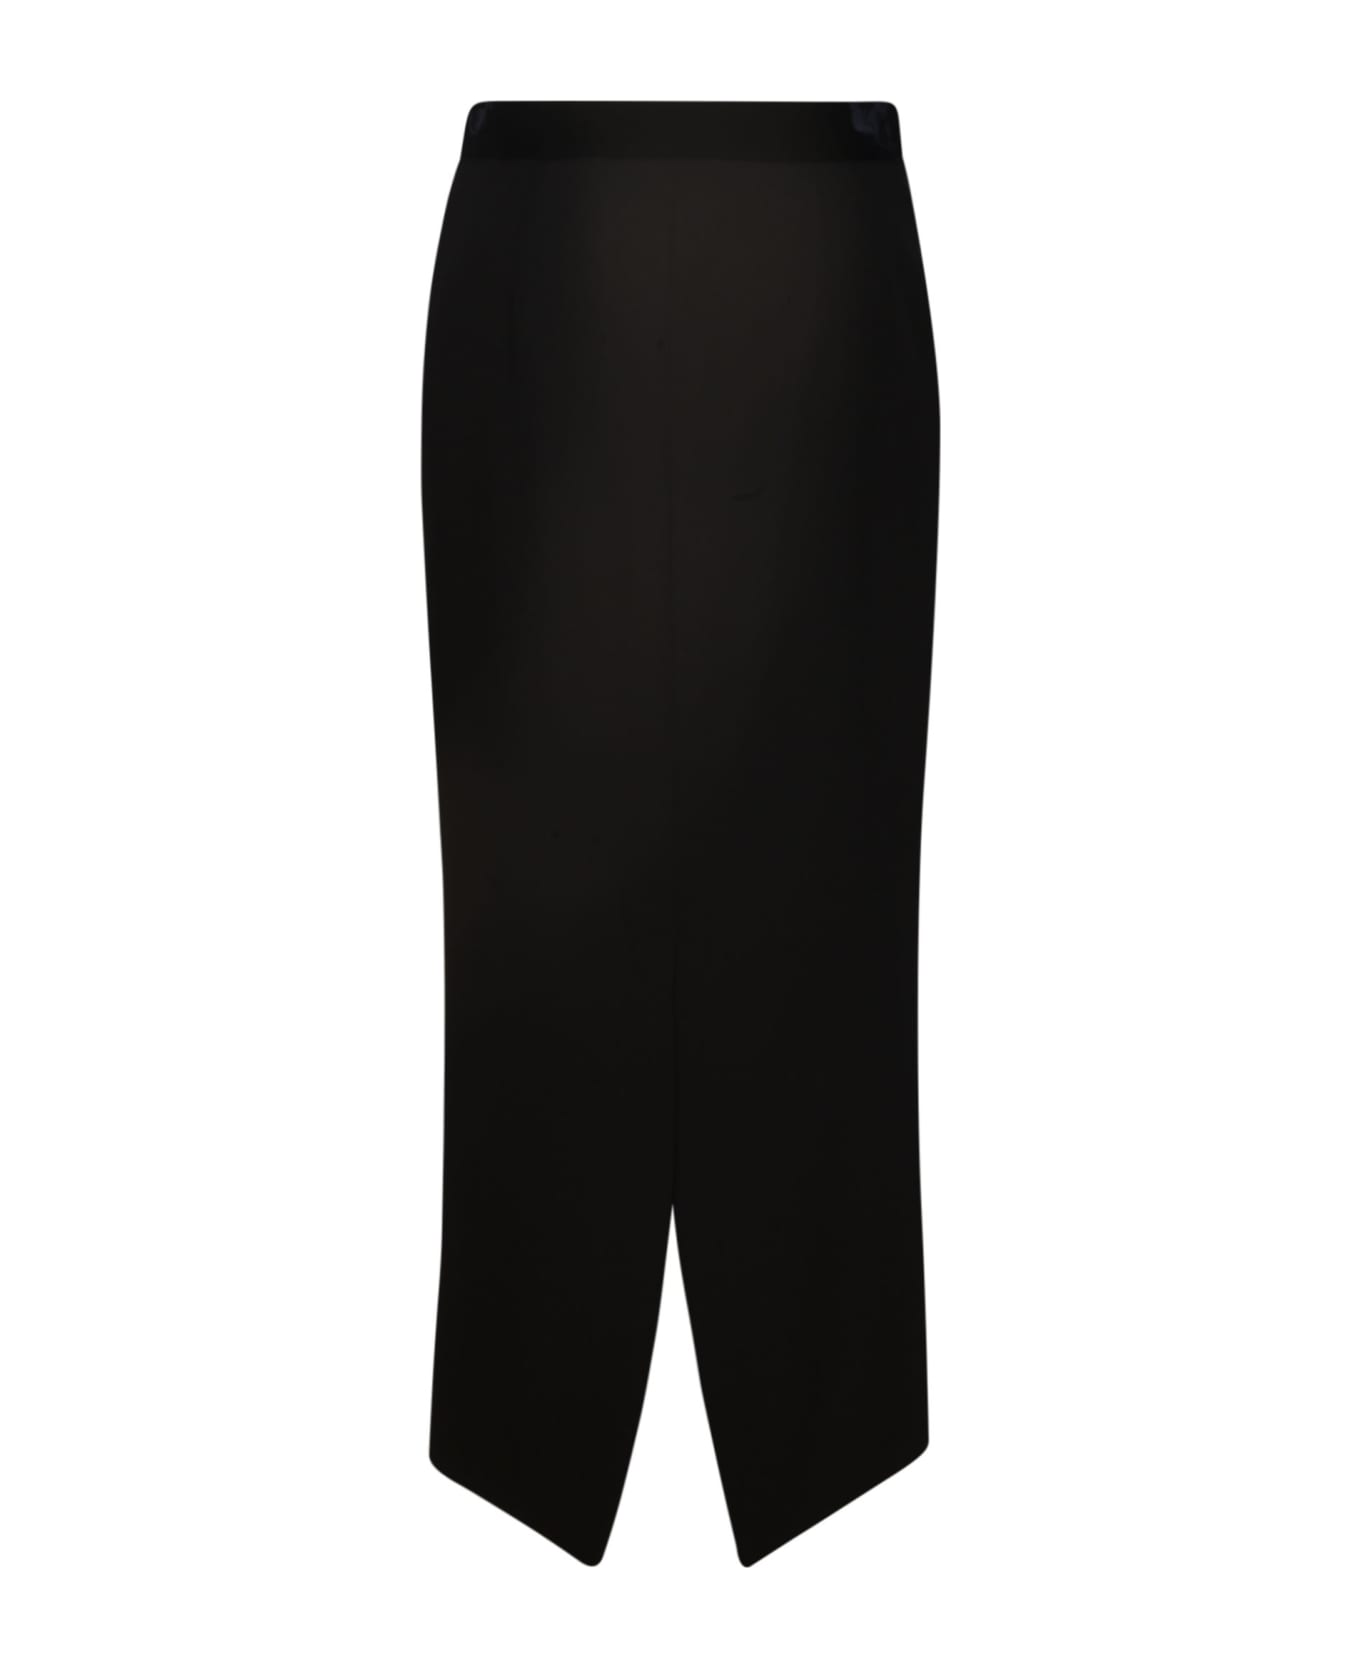 Giorgio Armani Long Length Fitted Skirt - Pz01